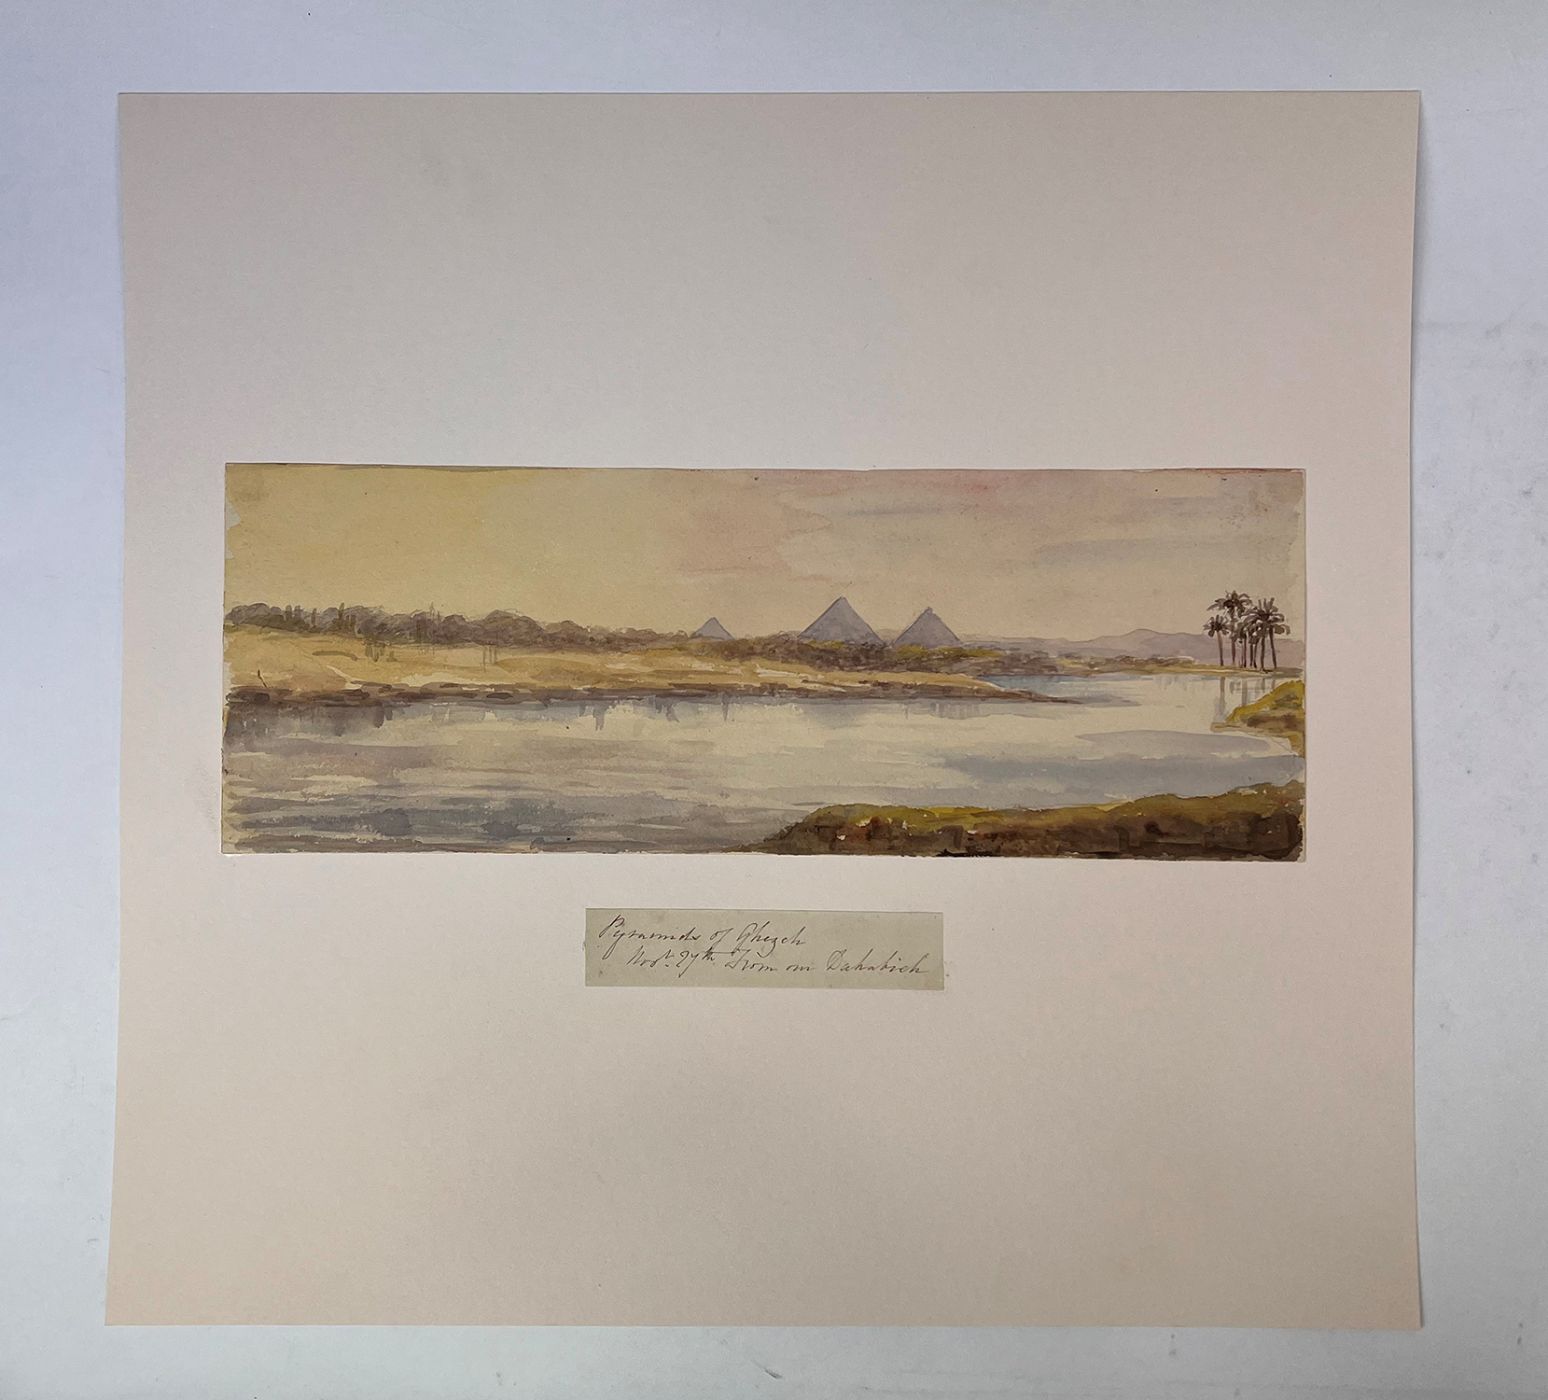 A FINE COLLECTION OF TWENTY-SEVEN EARLY WATERCOLOUR VIEWS OF THE NILE, PRODUCED DURING A WINTER CRUISE IN 1864-65, DEPICTING THE ANCIENT SITES AND LANDSCAPES OF UPPER EGYPT, NUBIA, AND THE SECOND CATARACT -  image 5